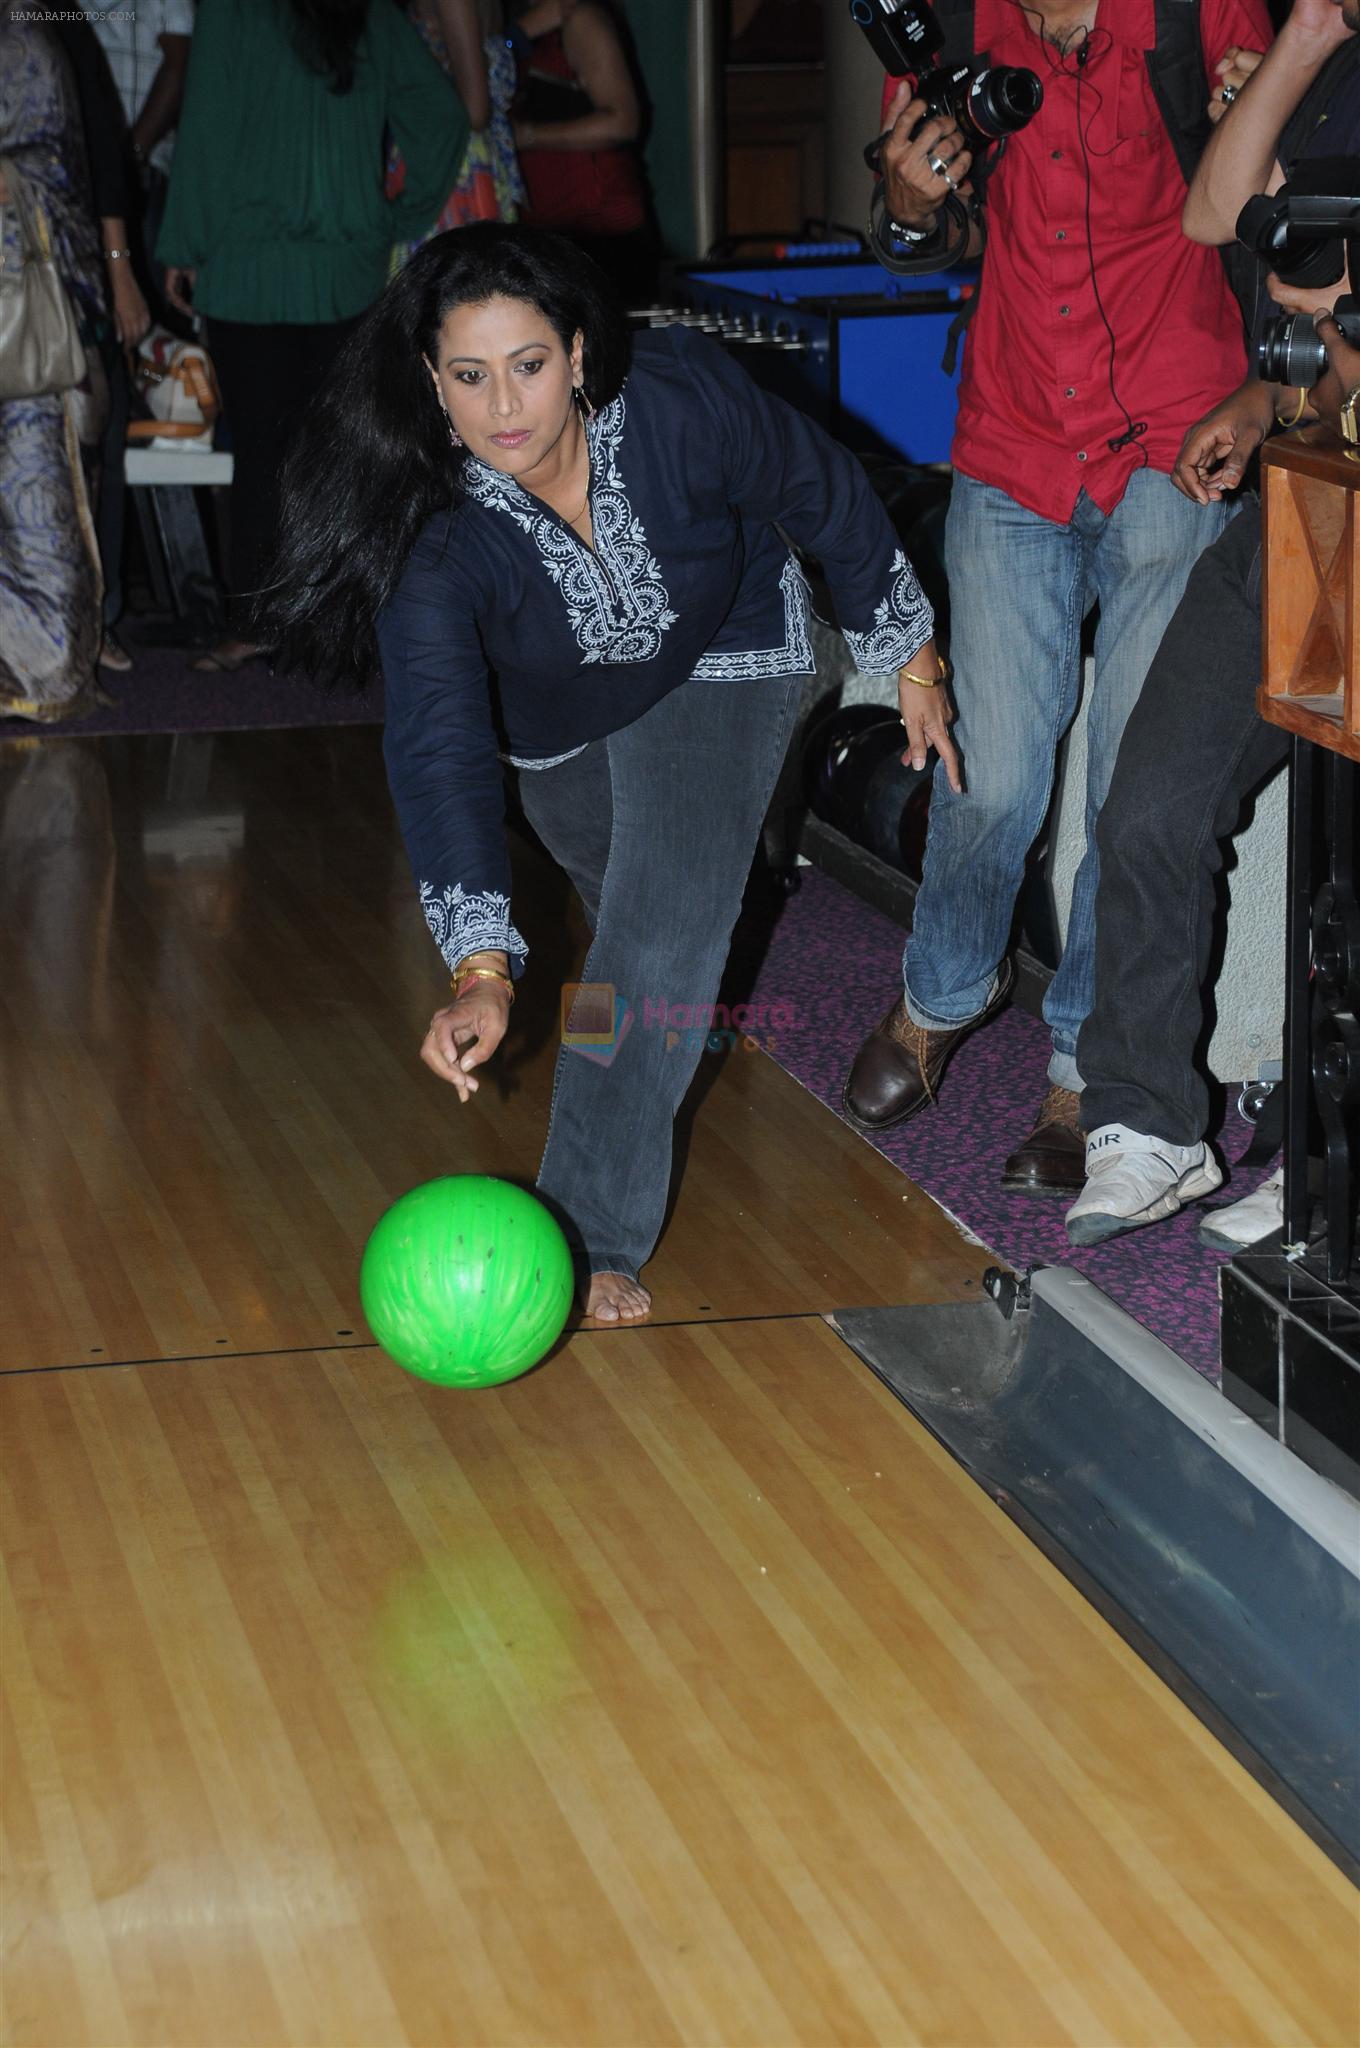 Mona Ambegaonkar at the Celebration of the Completion Party of 100 Episodes of PARVARISH kuch khatti kuch meethi in bowling alley on 7th April 2012